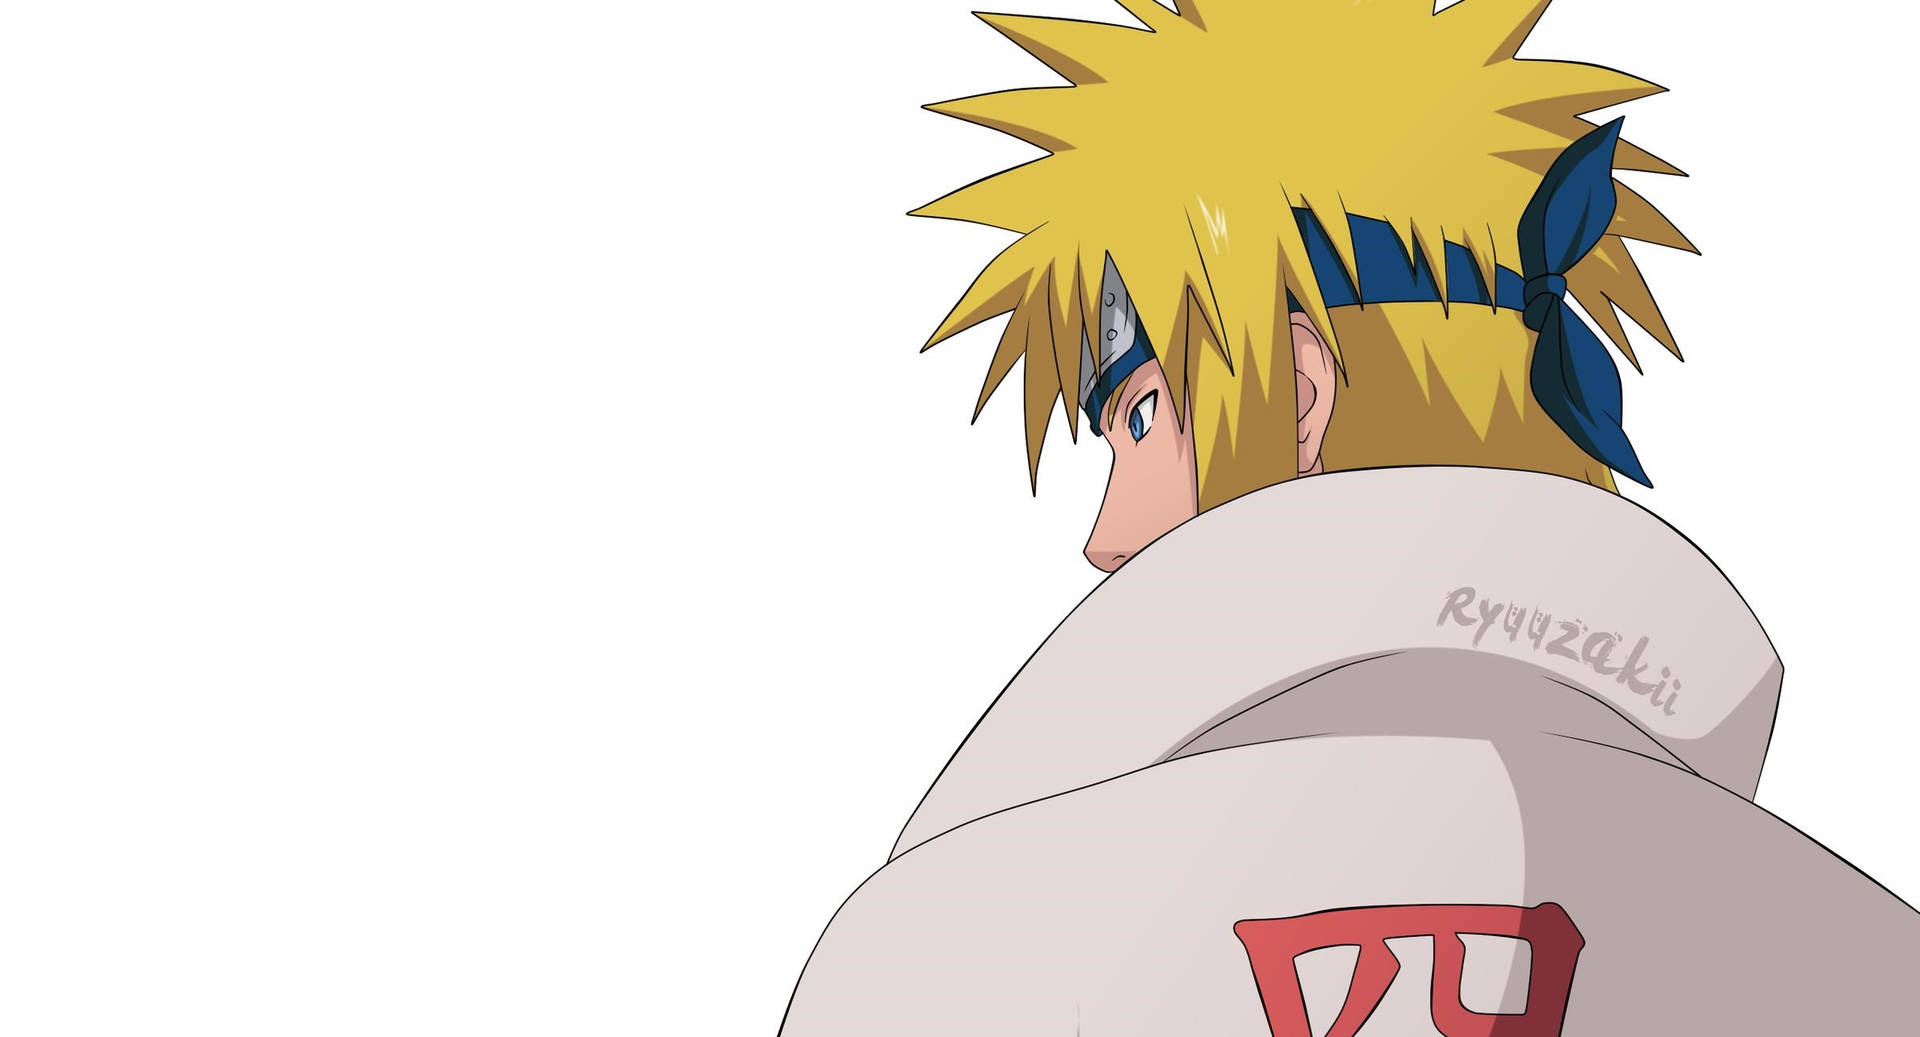 “The Legendary Ninja, Naruto Shippuden, in his Iconic Yellow Outfit” Wallpaper